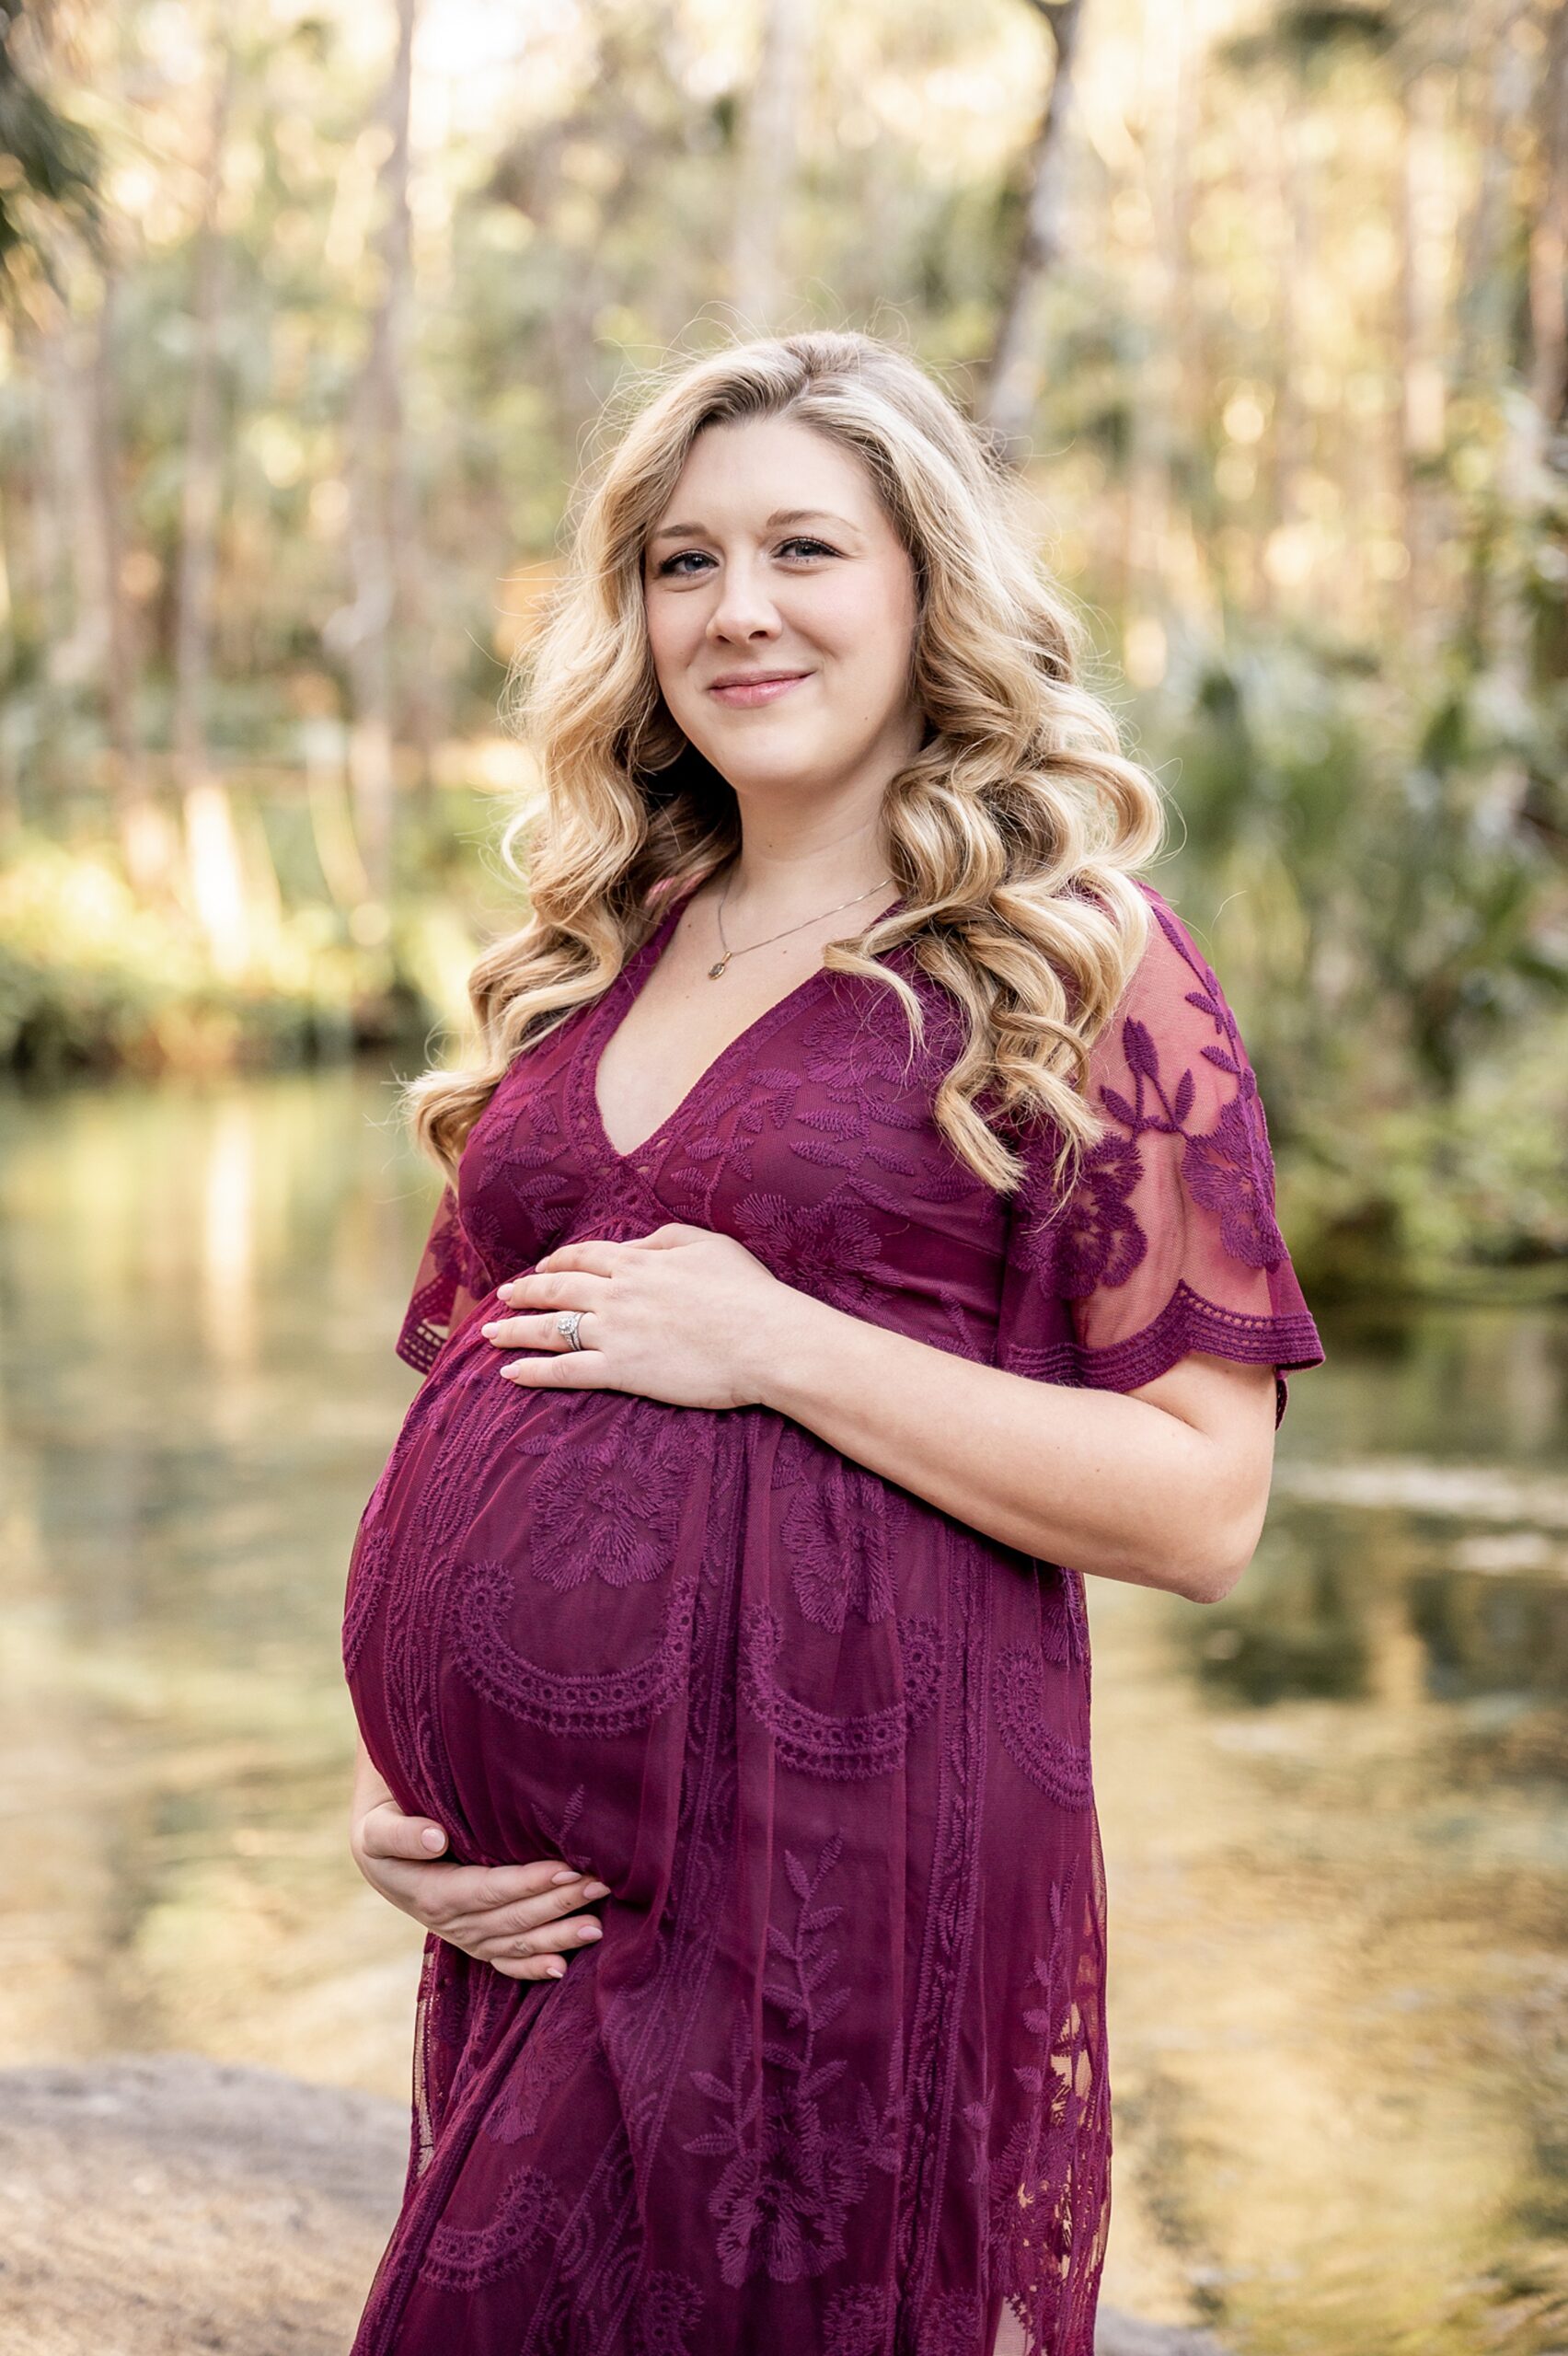 A mom to be in a purple lace maternity gown stands by a river holding her bump carrboro midwifery